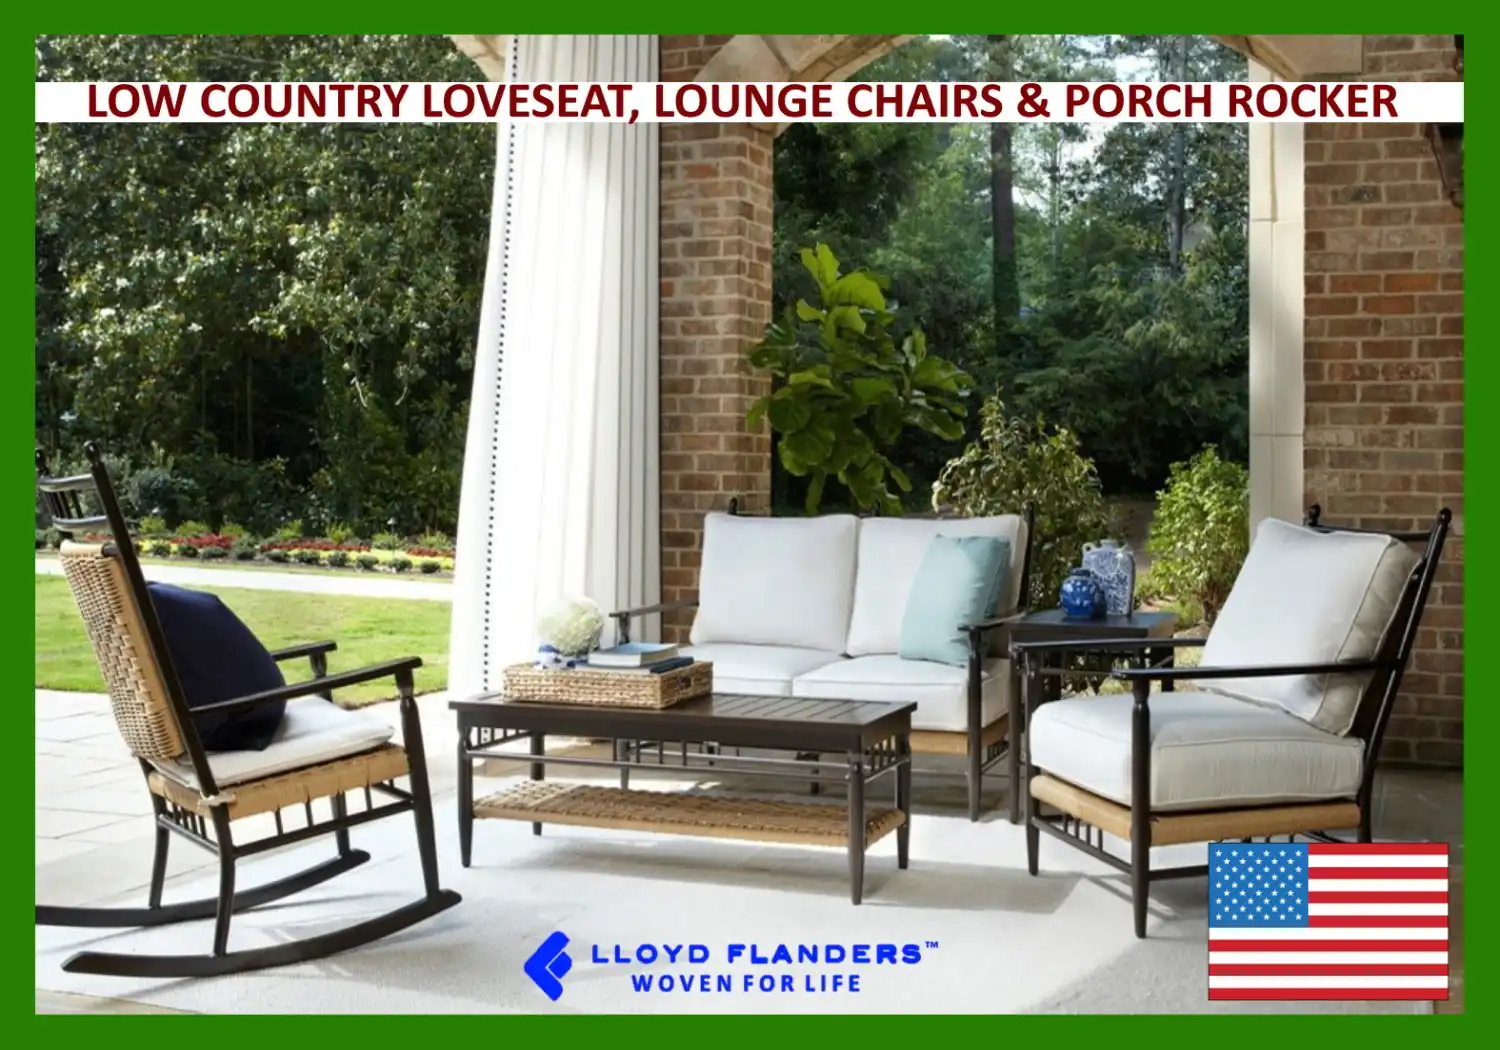 LOW COUNTRY LOVESEAT, LOUNGE CHAIRS & PORCH ROCKER